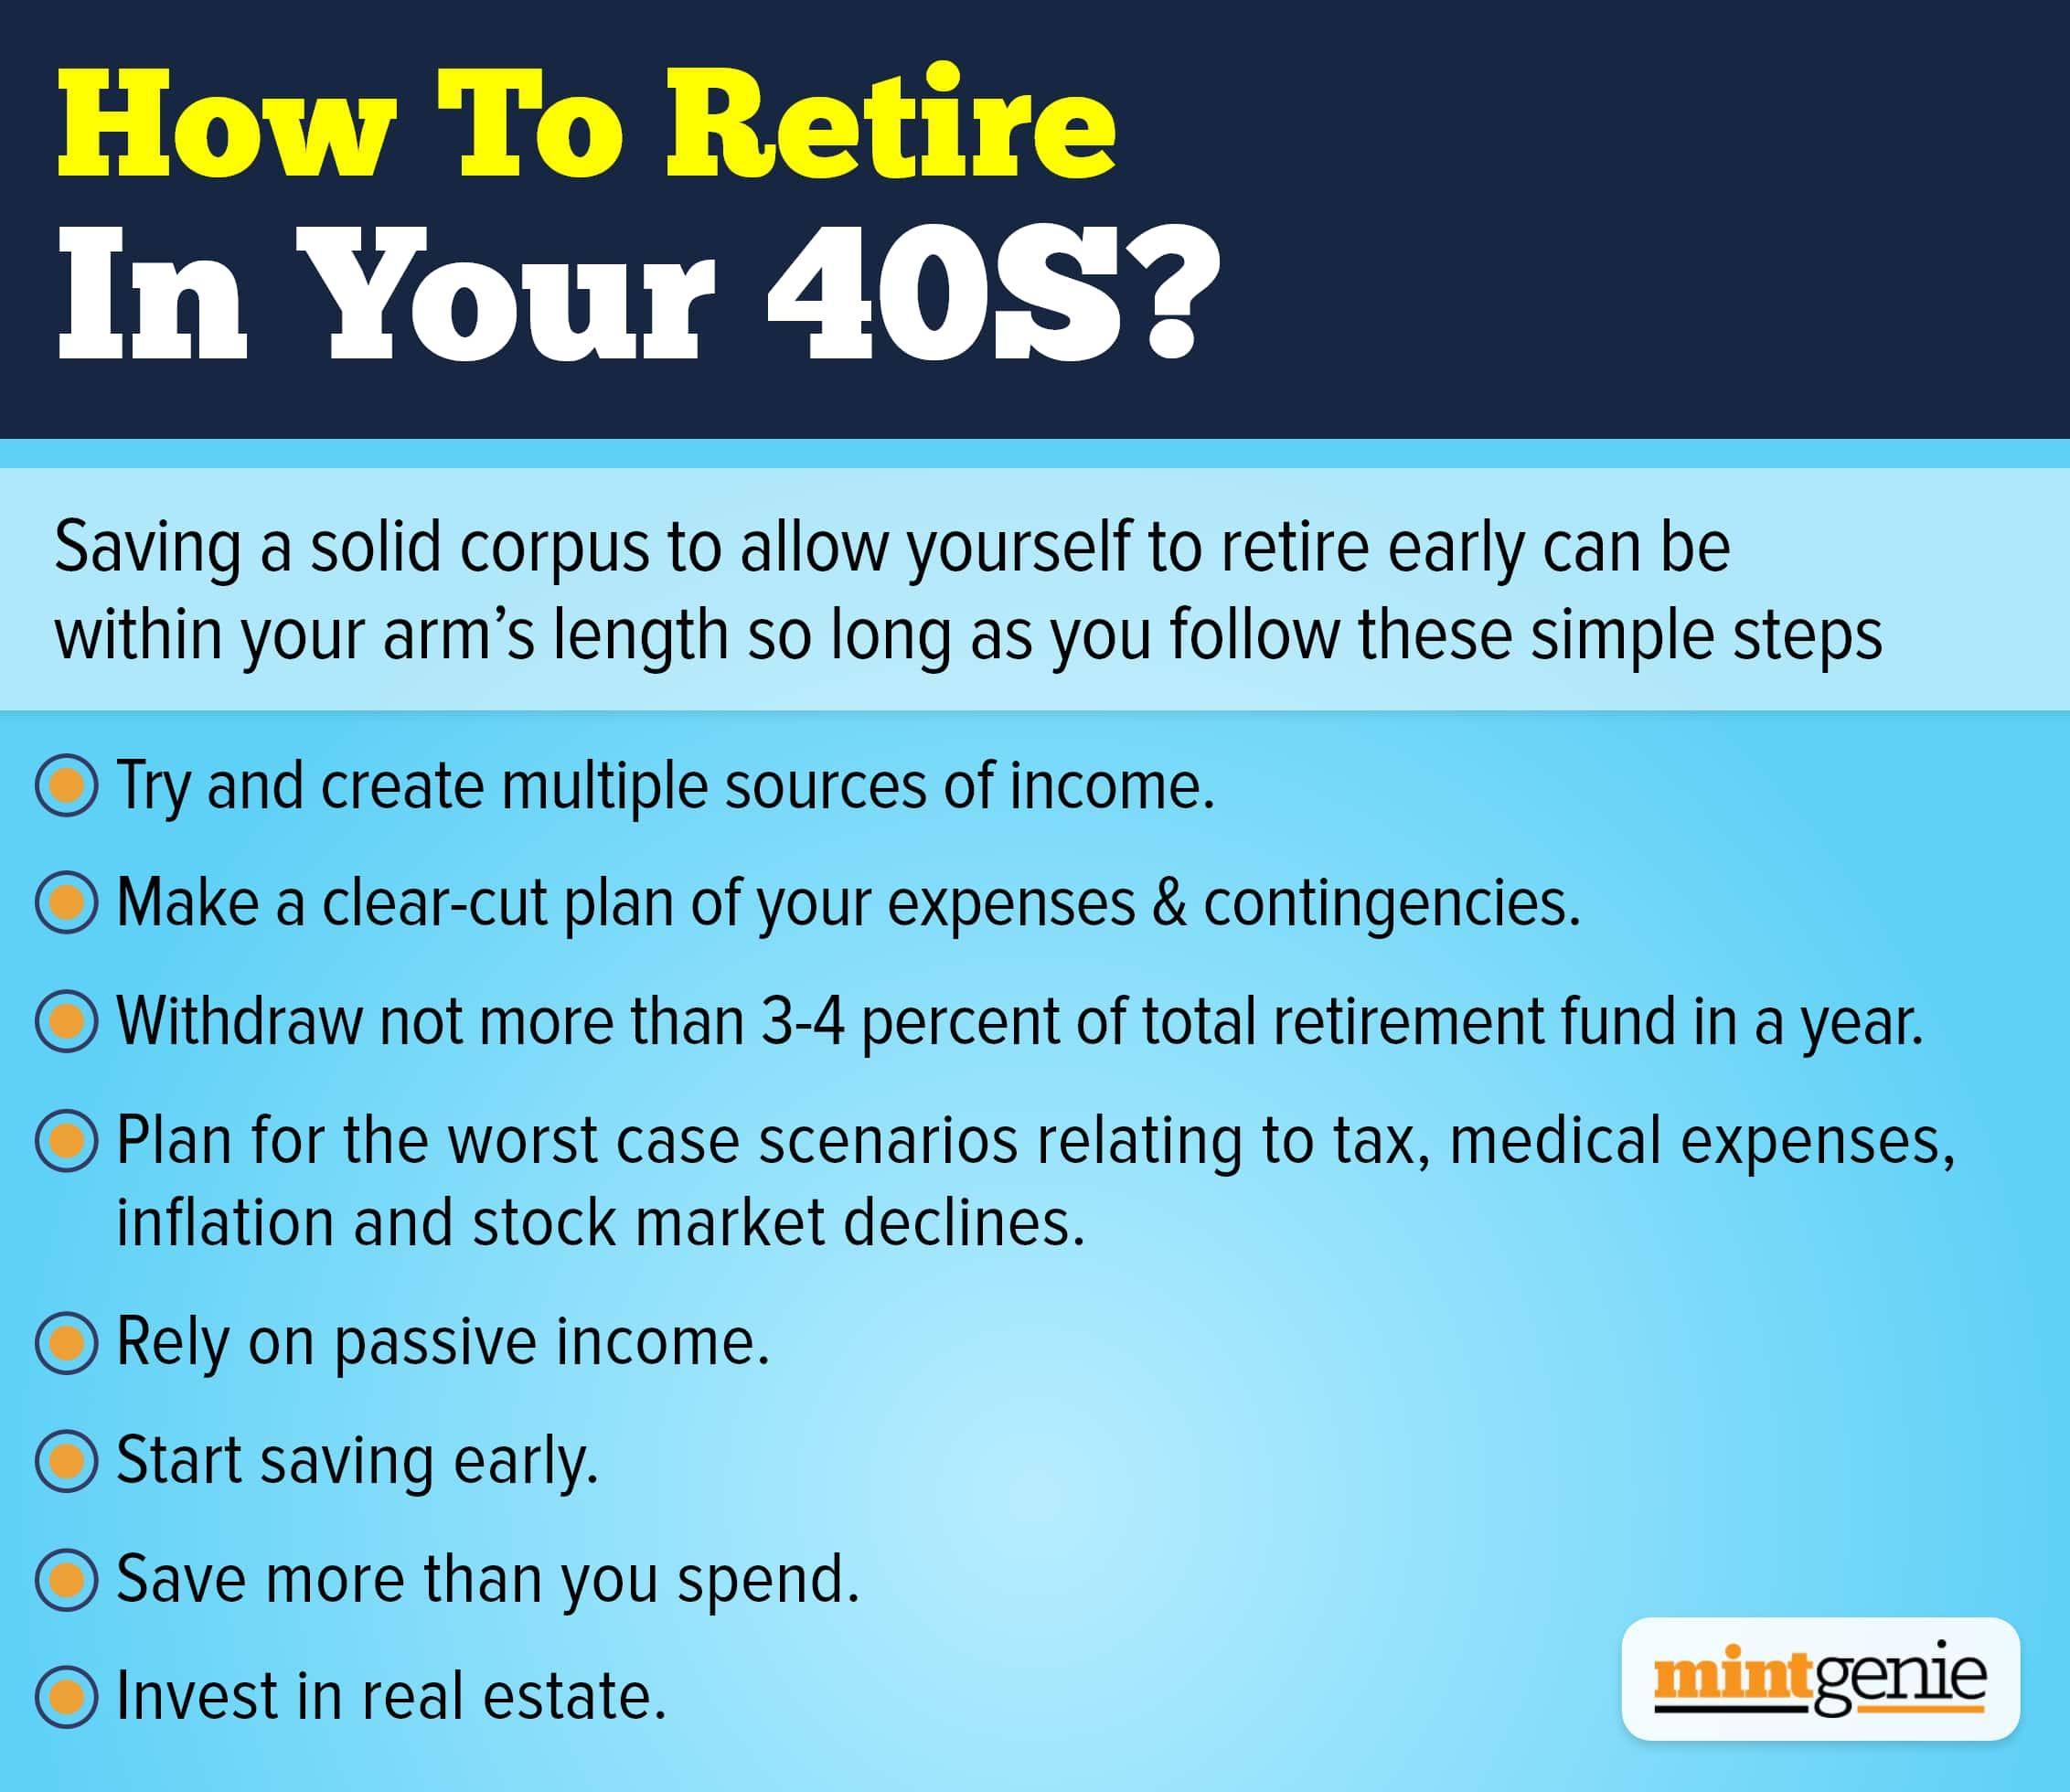 We explain how to retire in your 40s